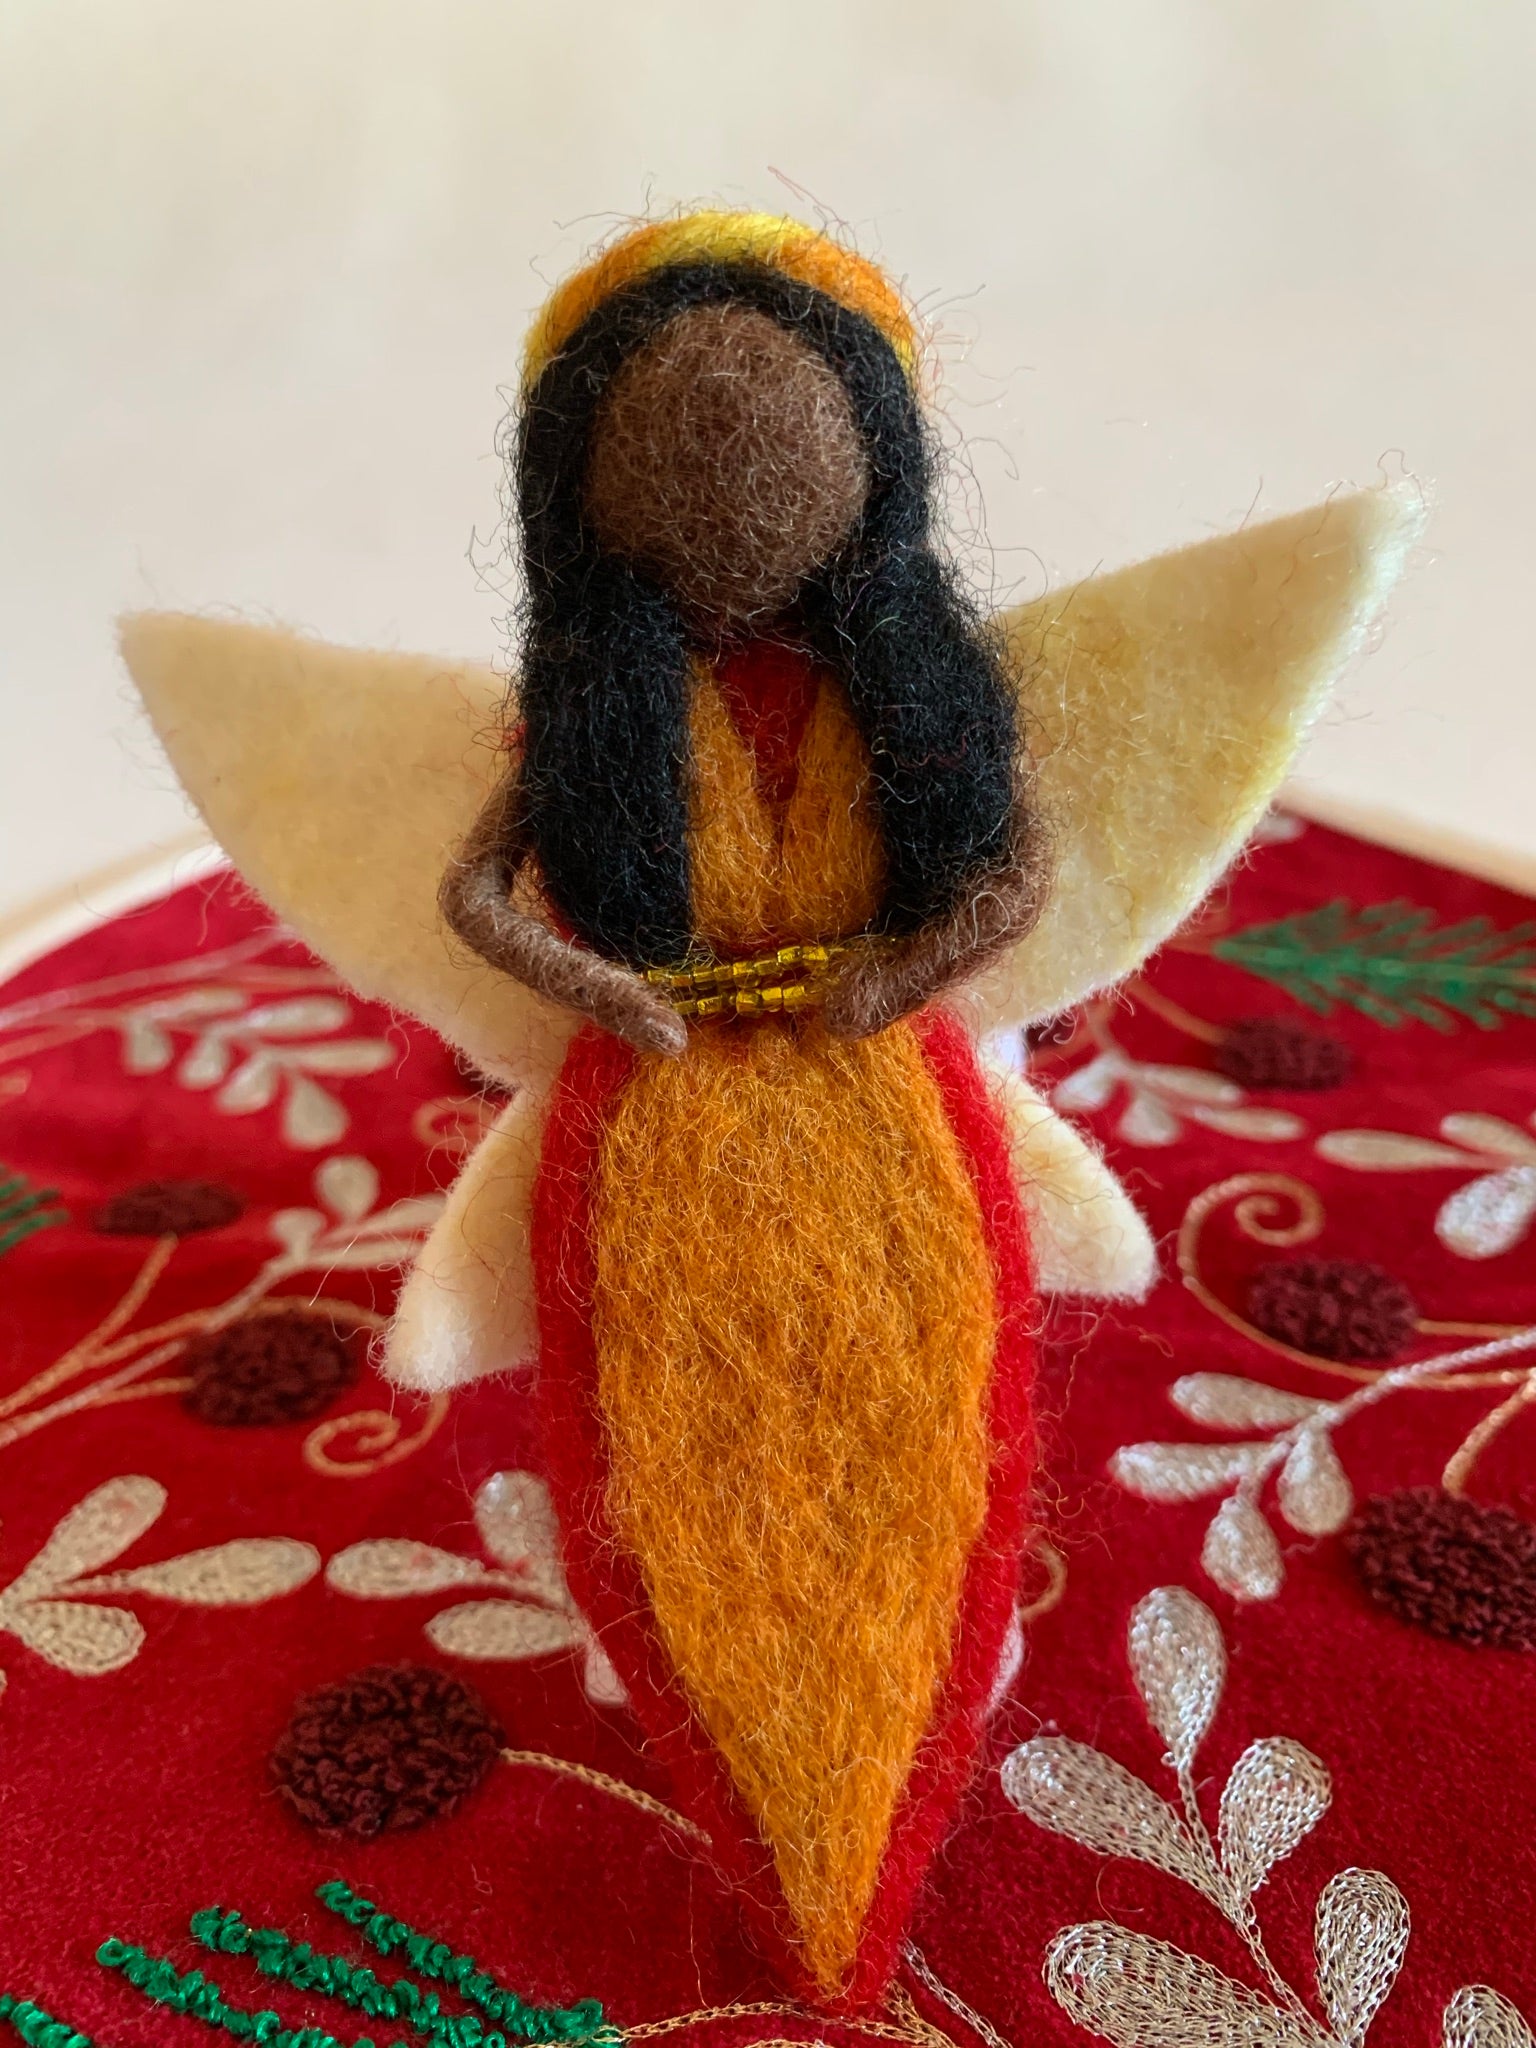 The close-up of the fire-fairy Christmas ornament is handmade (fair trade) from 100% wool. She is black-skinned & wearing an orange dress with red on the edge & has a double row of tiny gold beads around the empire waist. She wears a yellow & orange headpiece, has black hair and white wings with a bit of light yellow on them. She has bendable arms and no facial markings. She is approximately 5"x4" and comes with a fair trade holiday "to/from" tag to use if giving as a gift.